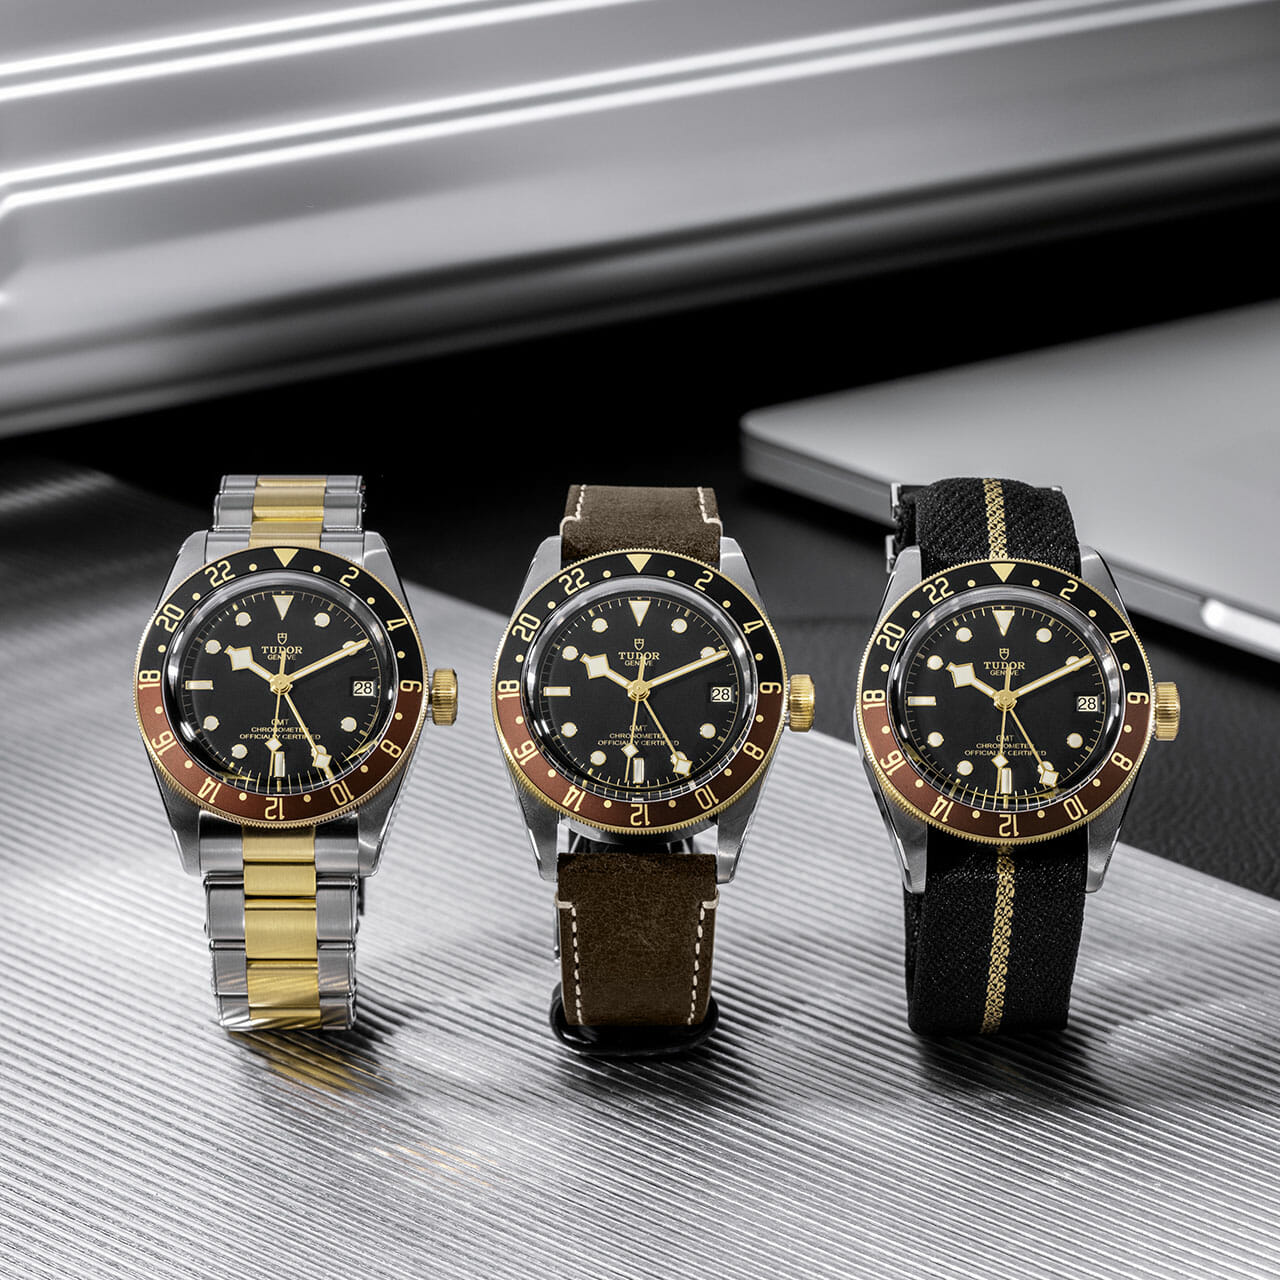 Watches and Wonders 2022: TUDOR